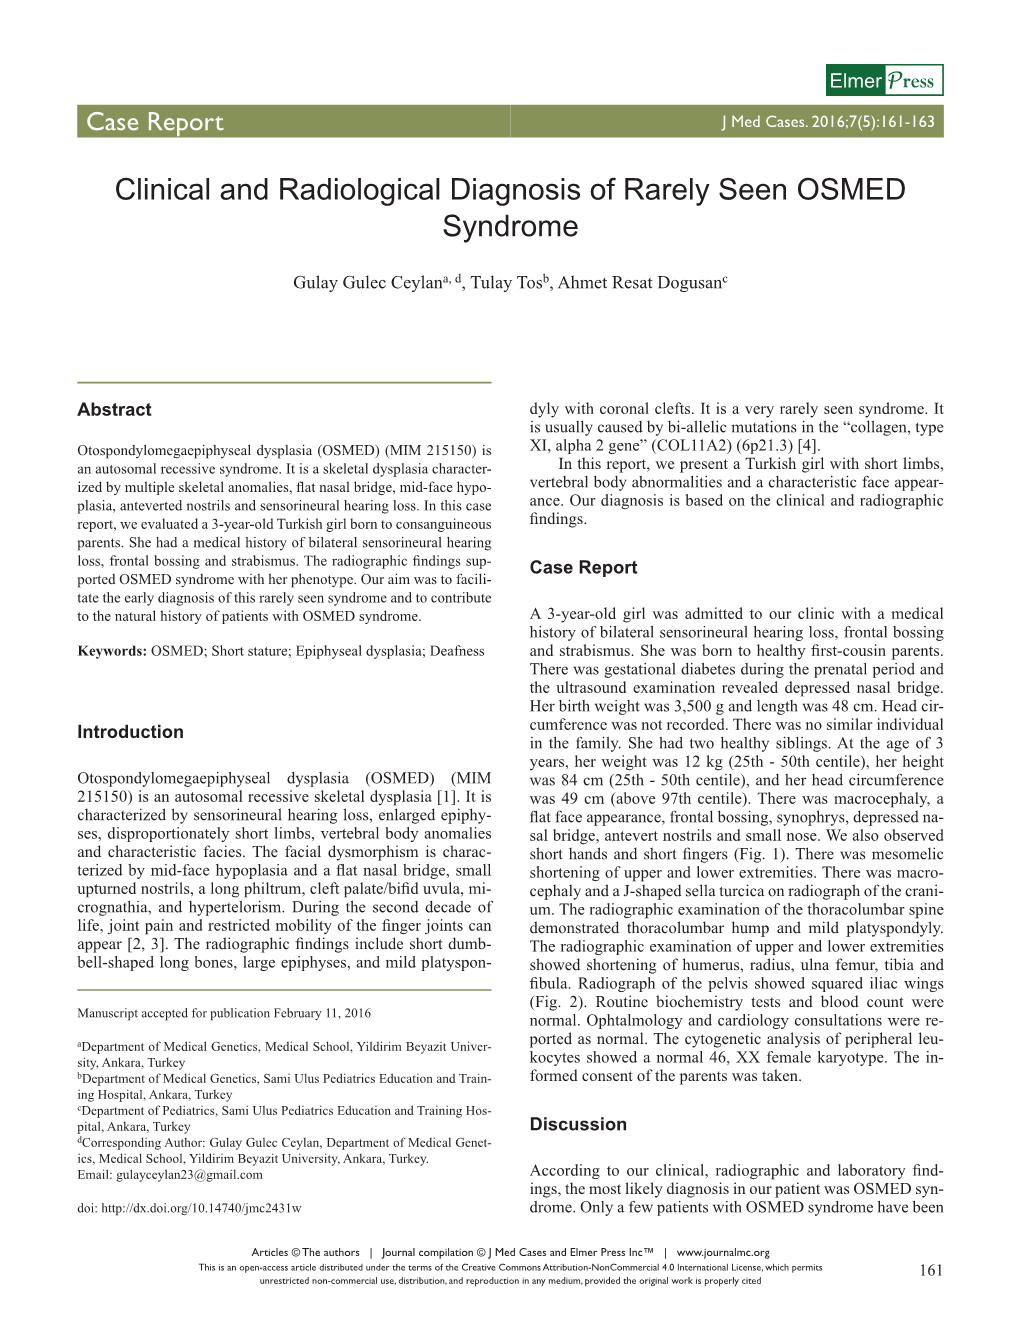 Clinical and Radiological Diagnosis of Rarely Seen OSMED Syndrome